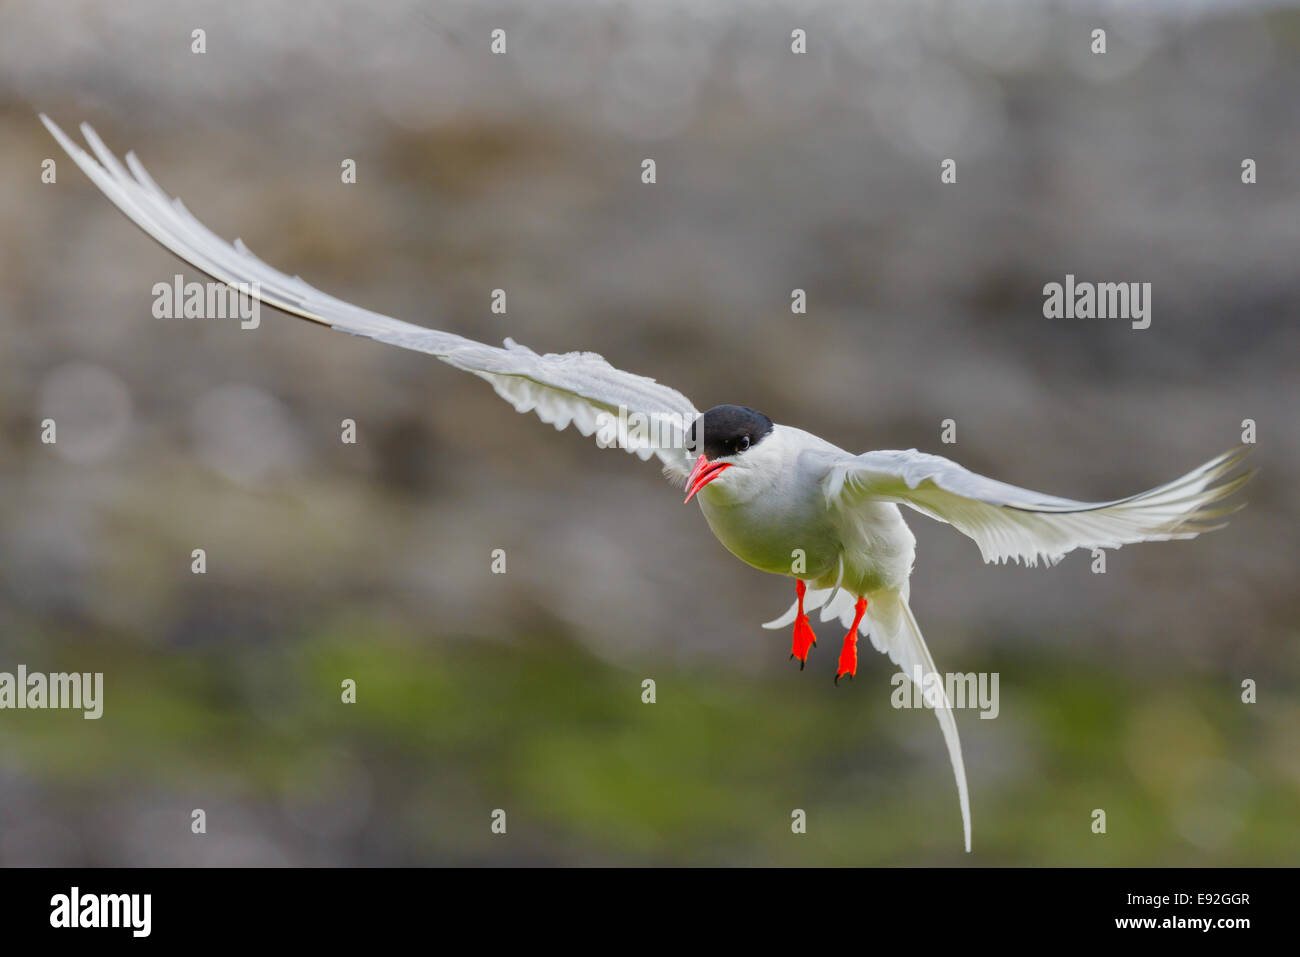 A wild adult Arctic Tern (Sterna paradisaea) aggressively protects its nest as it hovers in front of the camera. Stock Photo